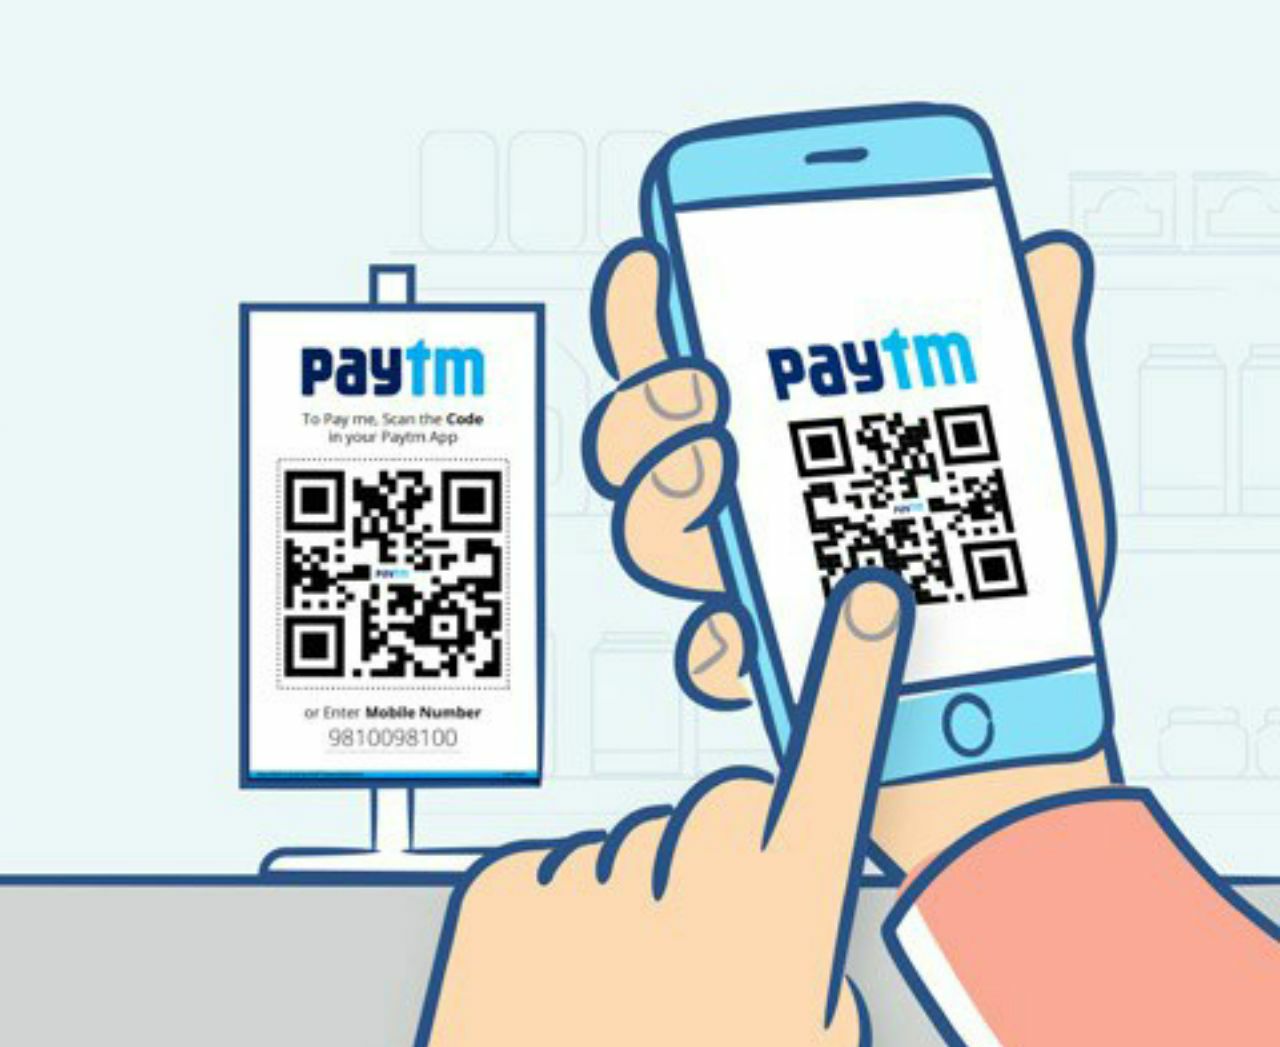 Paytm Merchant Offer - Friends, today we are going to tell you about 4 paytm merchant offer if you apply all these offers, you can get a lot of free paytm cash